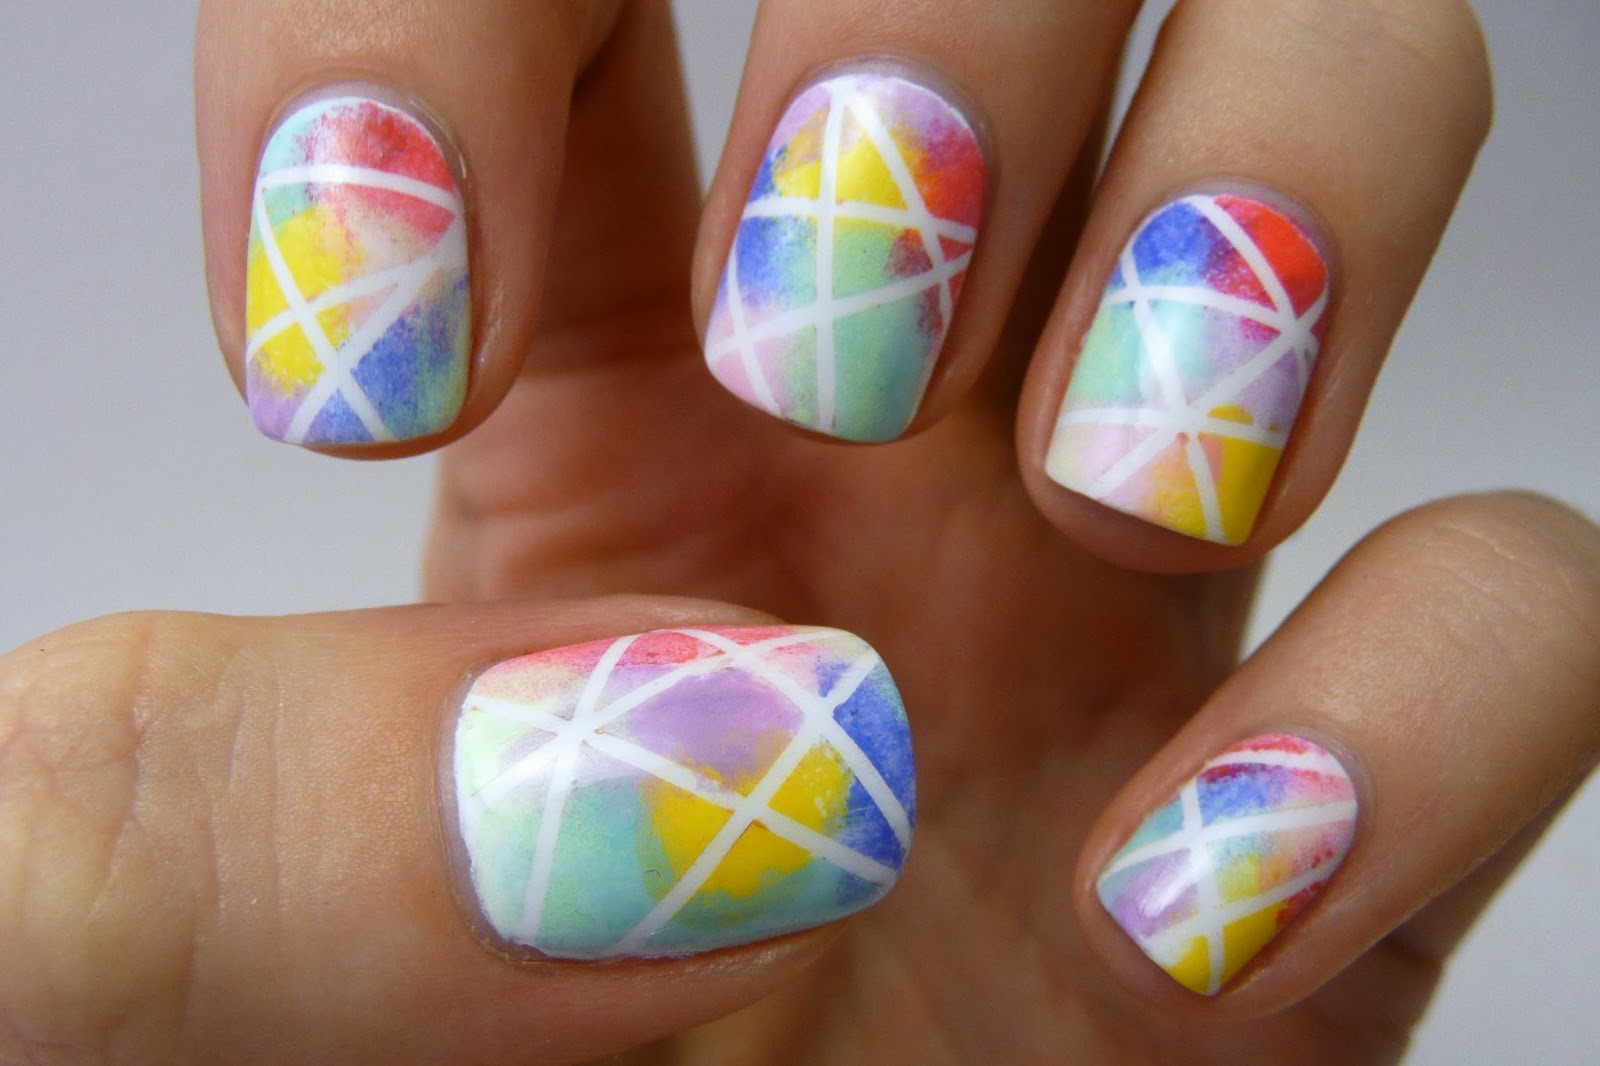 4. "Nail Art Striping Tape Designs" - wide 8